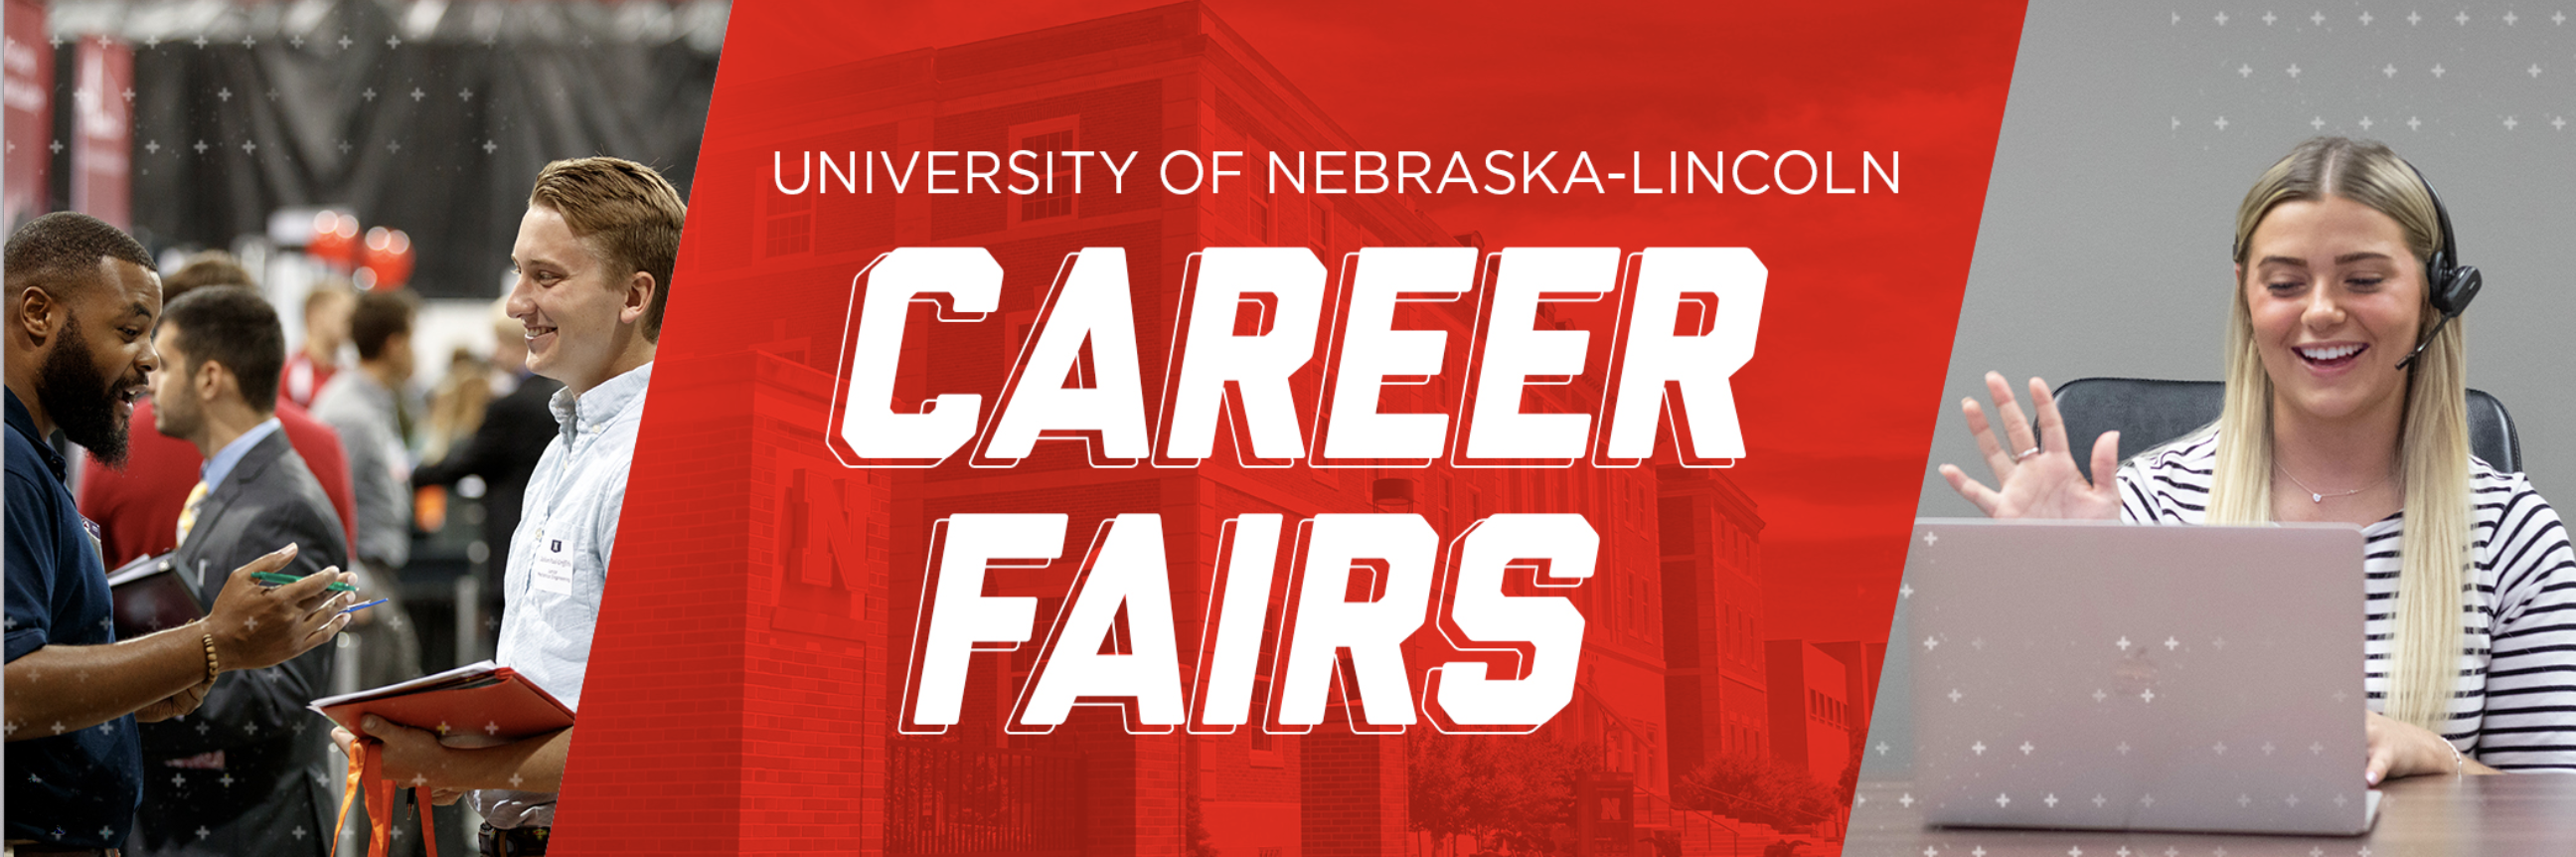 The in-person fair will take place over four days from September 21-24, 2021 with each day designated to specific career pathways. The virtual fair will run October 12-13, 2021. 